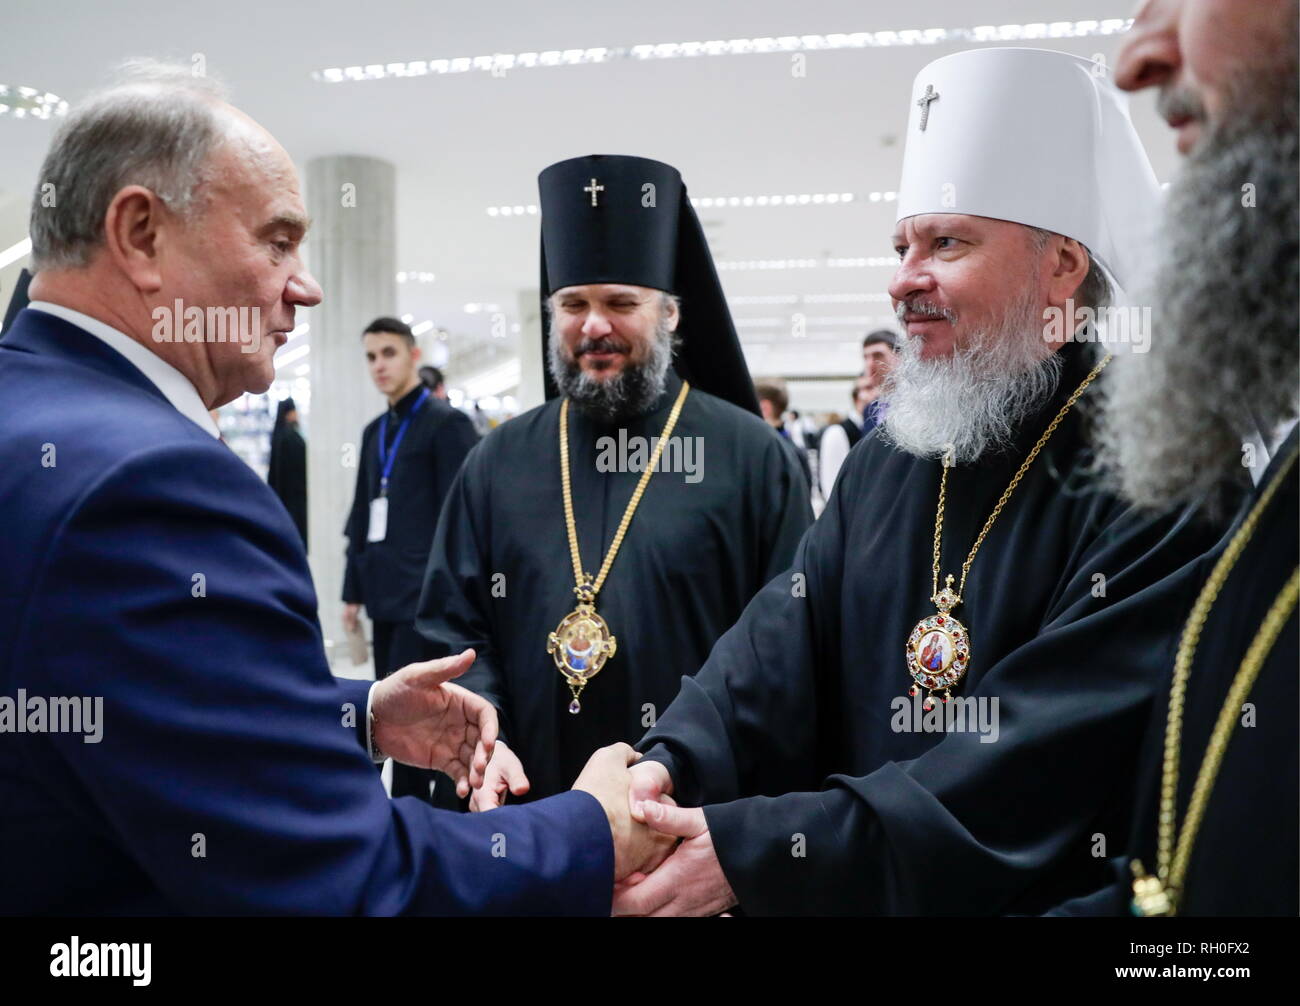 moscow-russia-31st-jan-2019-moscow-russia-january-31-2019-gennady-zyuganov-l-chairman-of-the-russian-federation-communist-party-kprf-shakes-hands-with-metropolitans-ahead-of-a-grand-ceremony-at-the-state-kremlin-palace-to-celebrate-the-10th-anniversary-of-the-6th-local-council-of-the-russian-orthodox-church-followed-by-the-enthronement-of-patriarch-kirill-of-moscow-and-all-russia-mikhail-metzeltass-credit-itar-tass-news-agencyalamy-live-news-RH0FX2.jpg